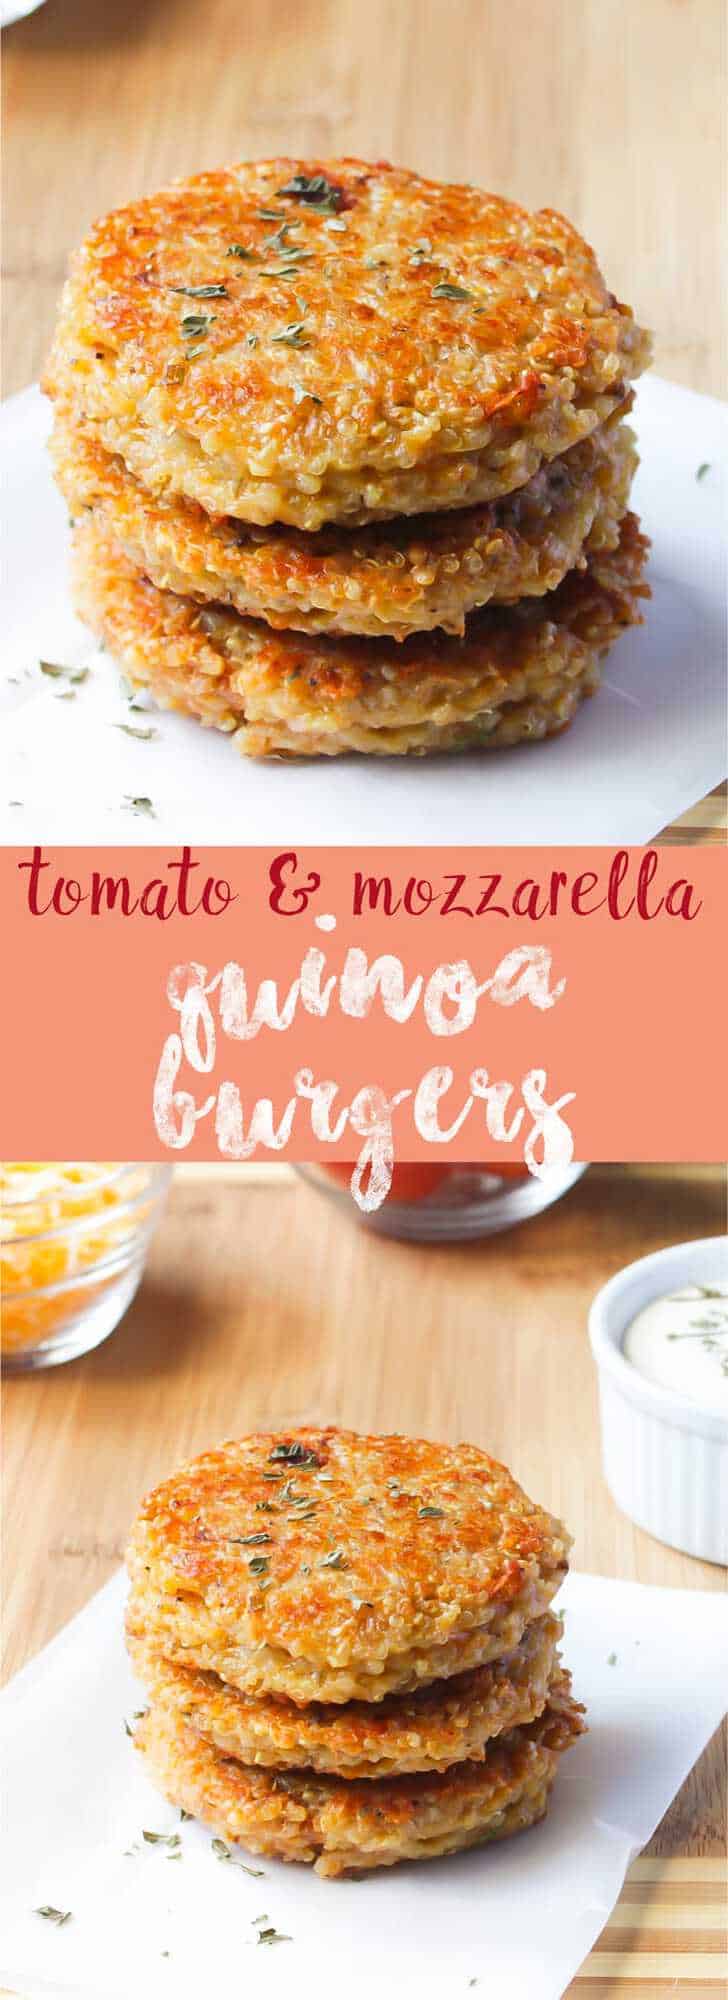 Sun-dried Tomato and Mozzarella Quinoa Burgers. Crazy delicious, veggie burgers that taste full of flavour and are filling and are very easy to make gluten free and vegan! via https://jessicainthekitchen.com